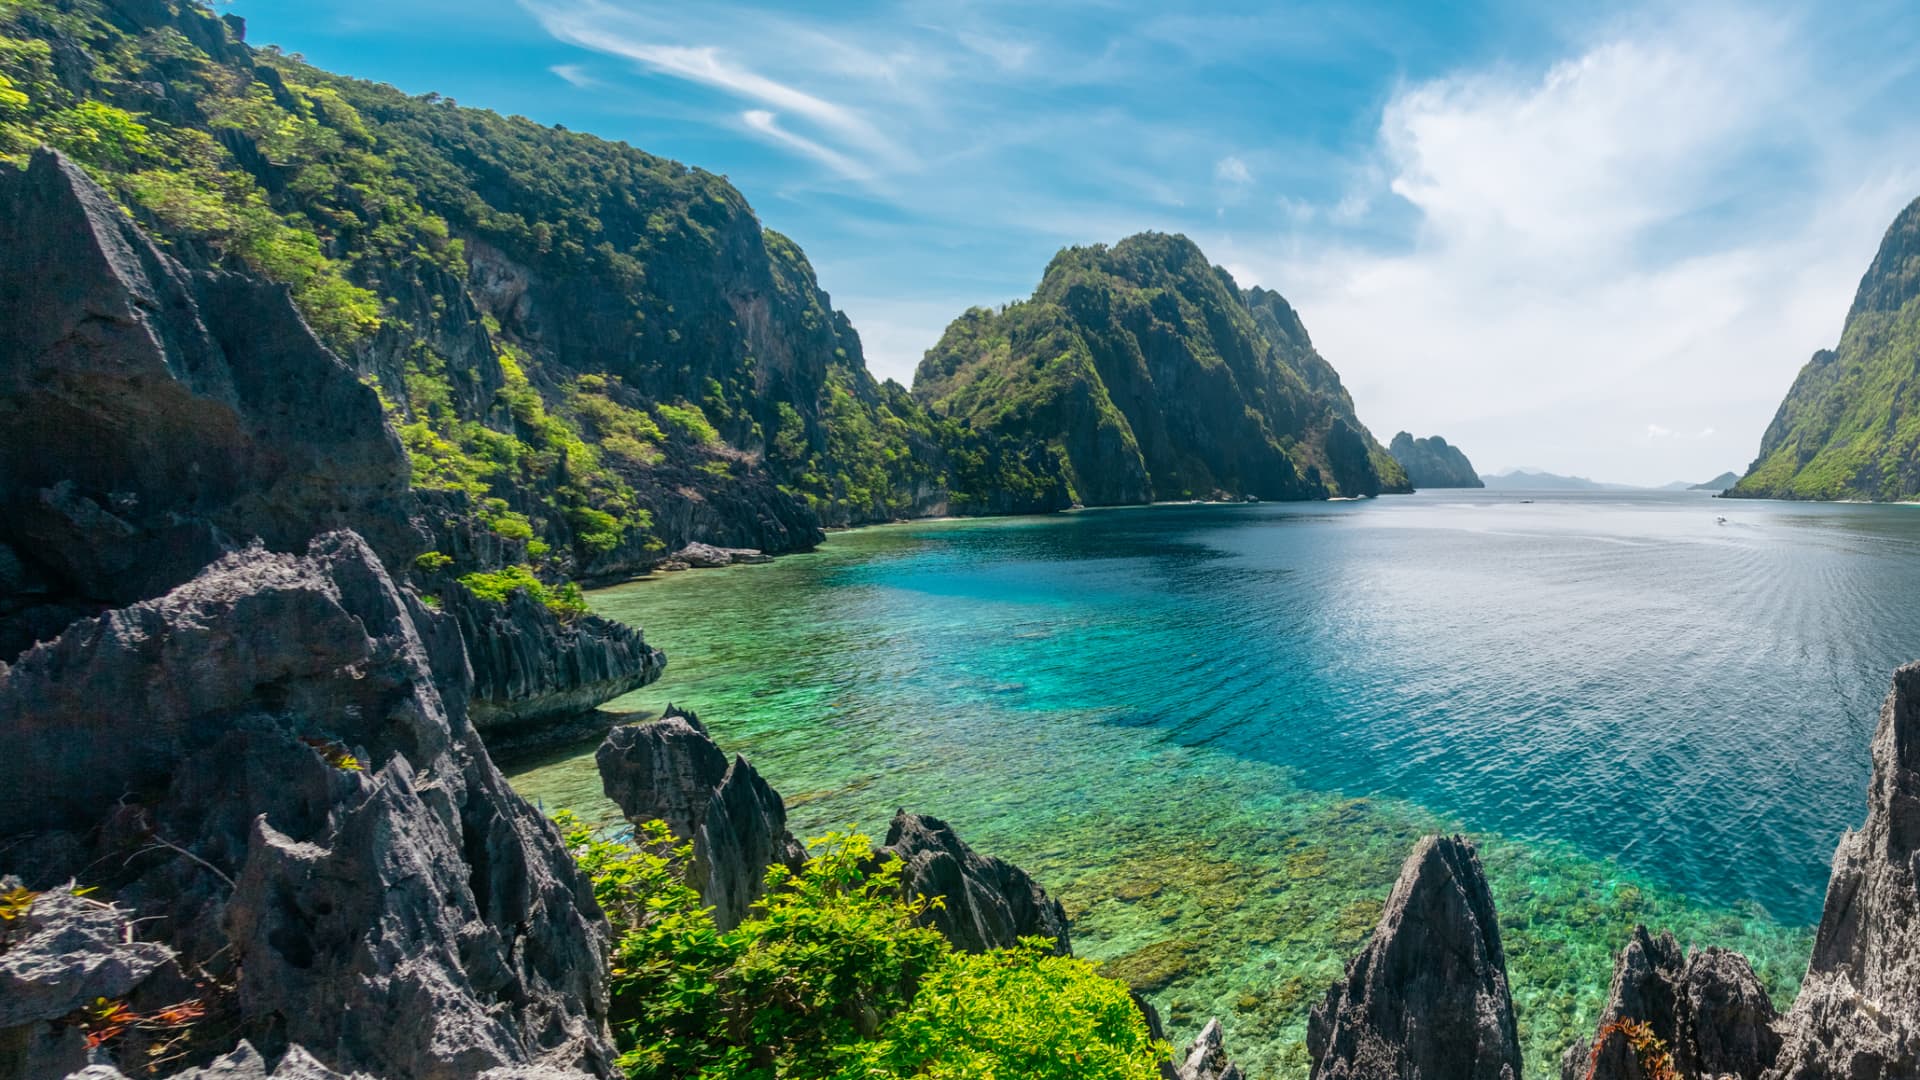 Palawan, a needle-thin archipelago in west Philippines, has been dubbed the most beautiful island in the world by various media outlets.